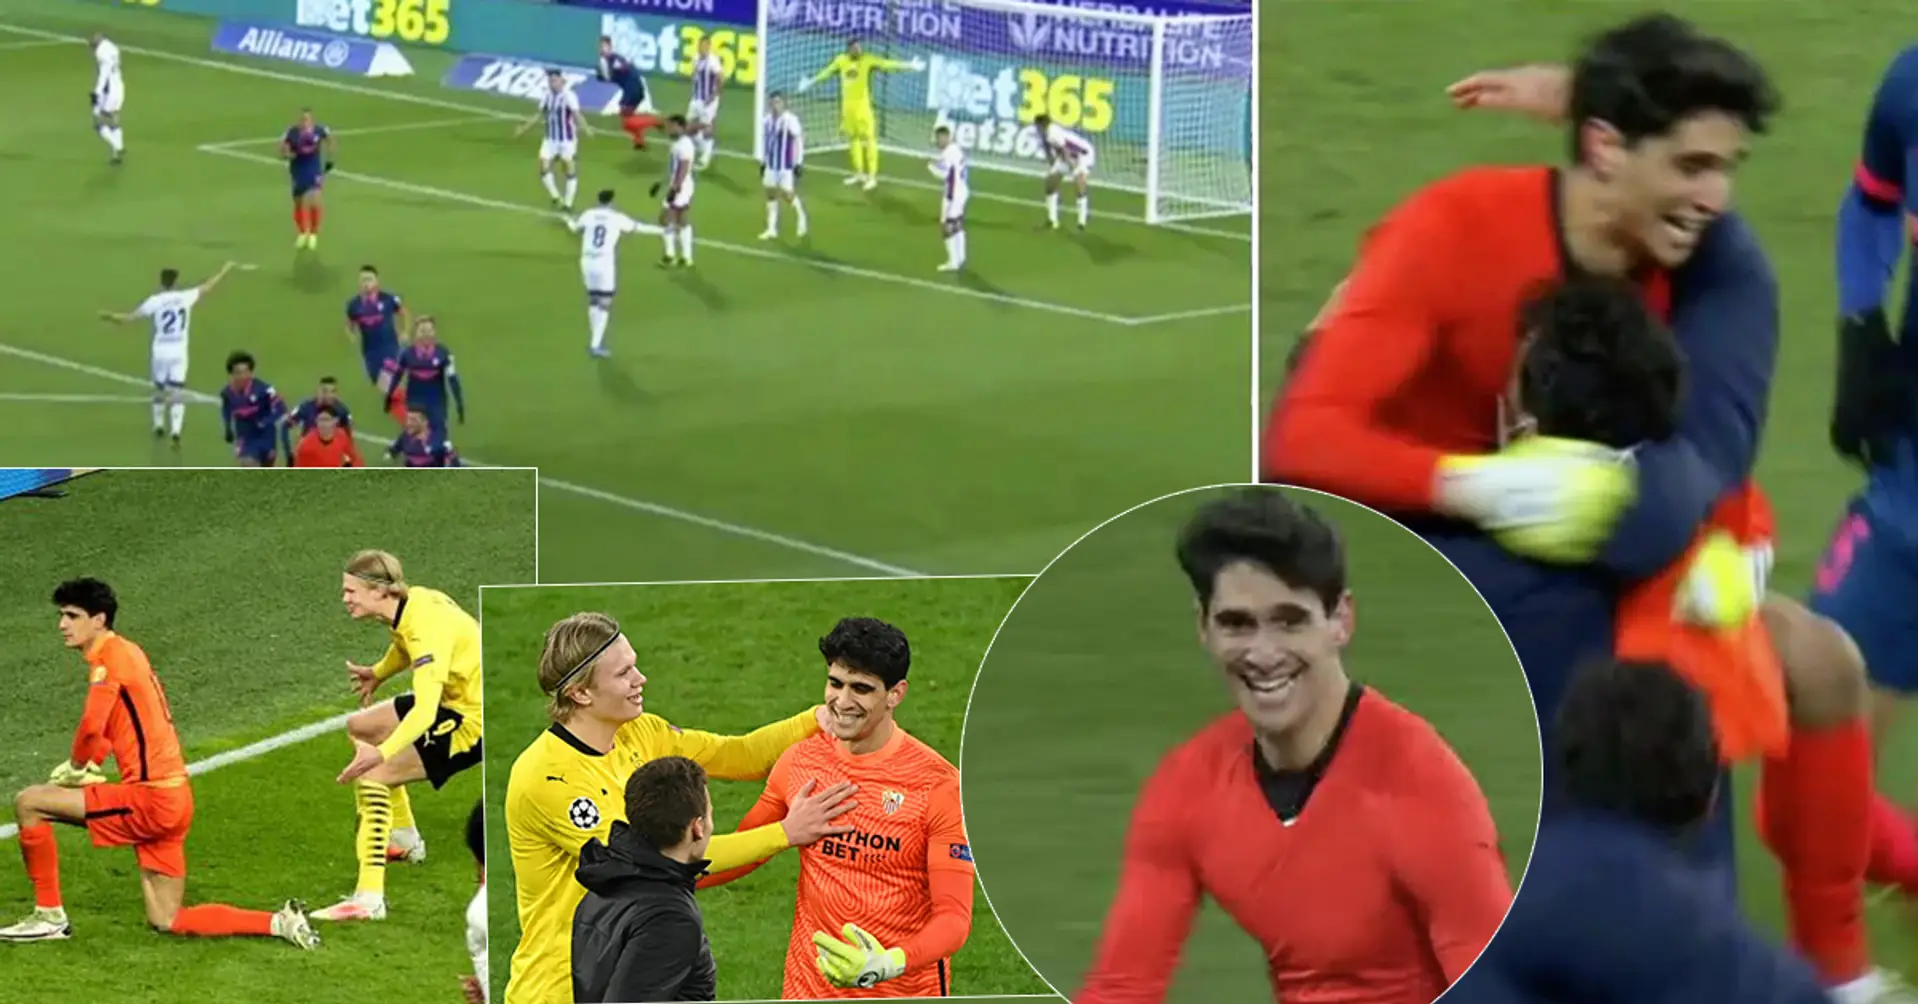 Sevilla goalkeeper Bono scores a dramatic 94th min goal after chat with Erling Haaland